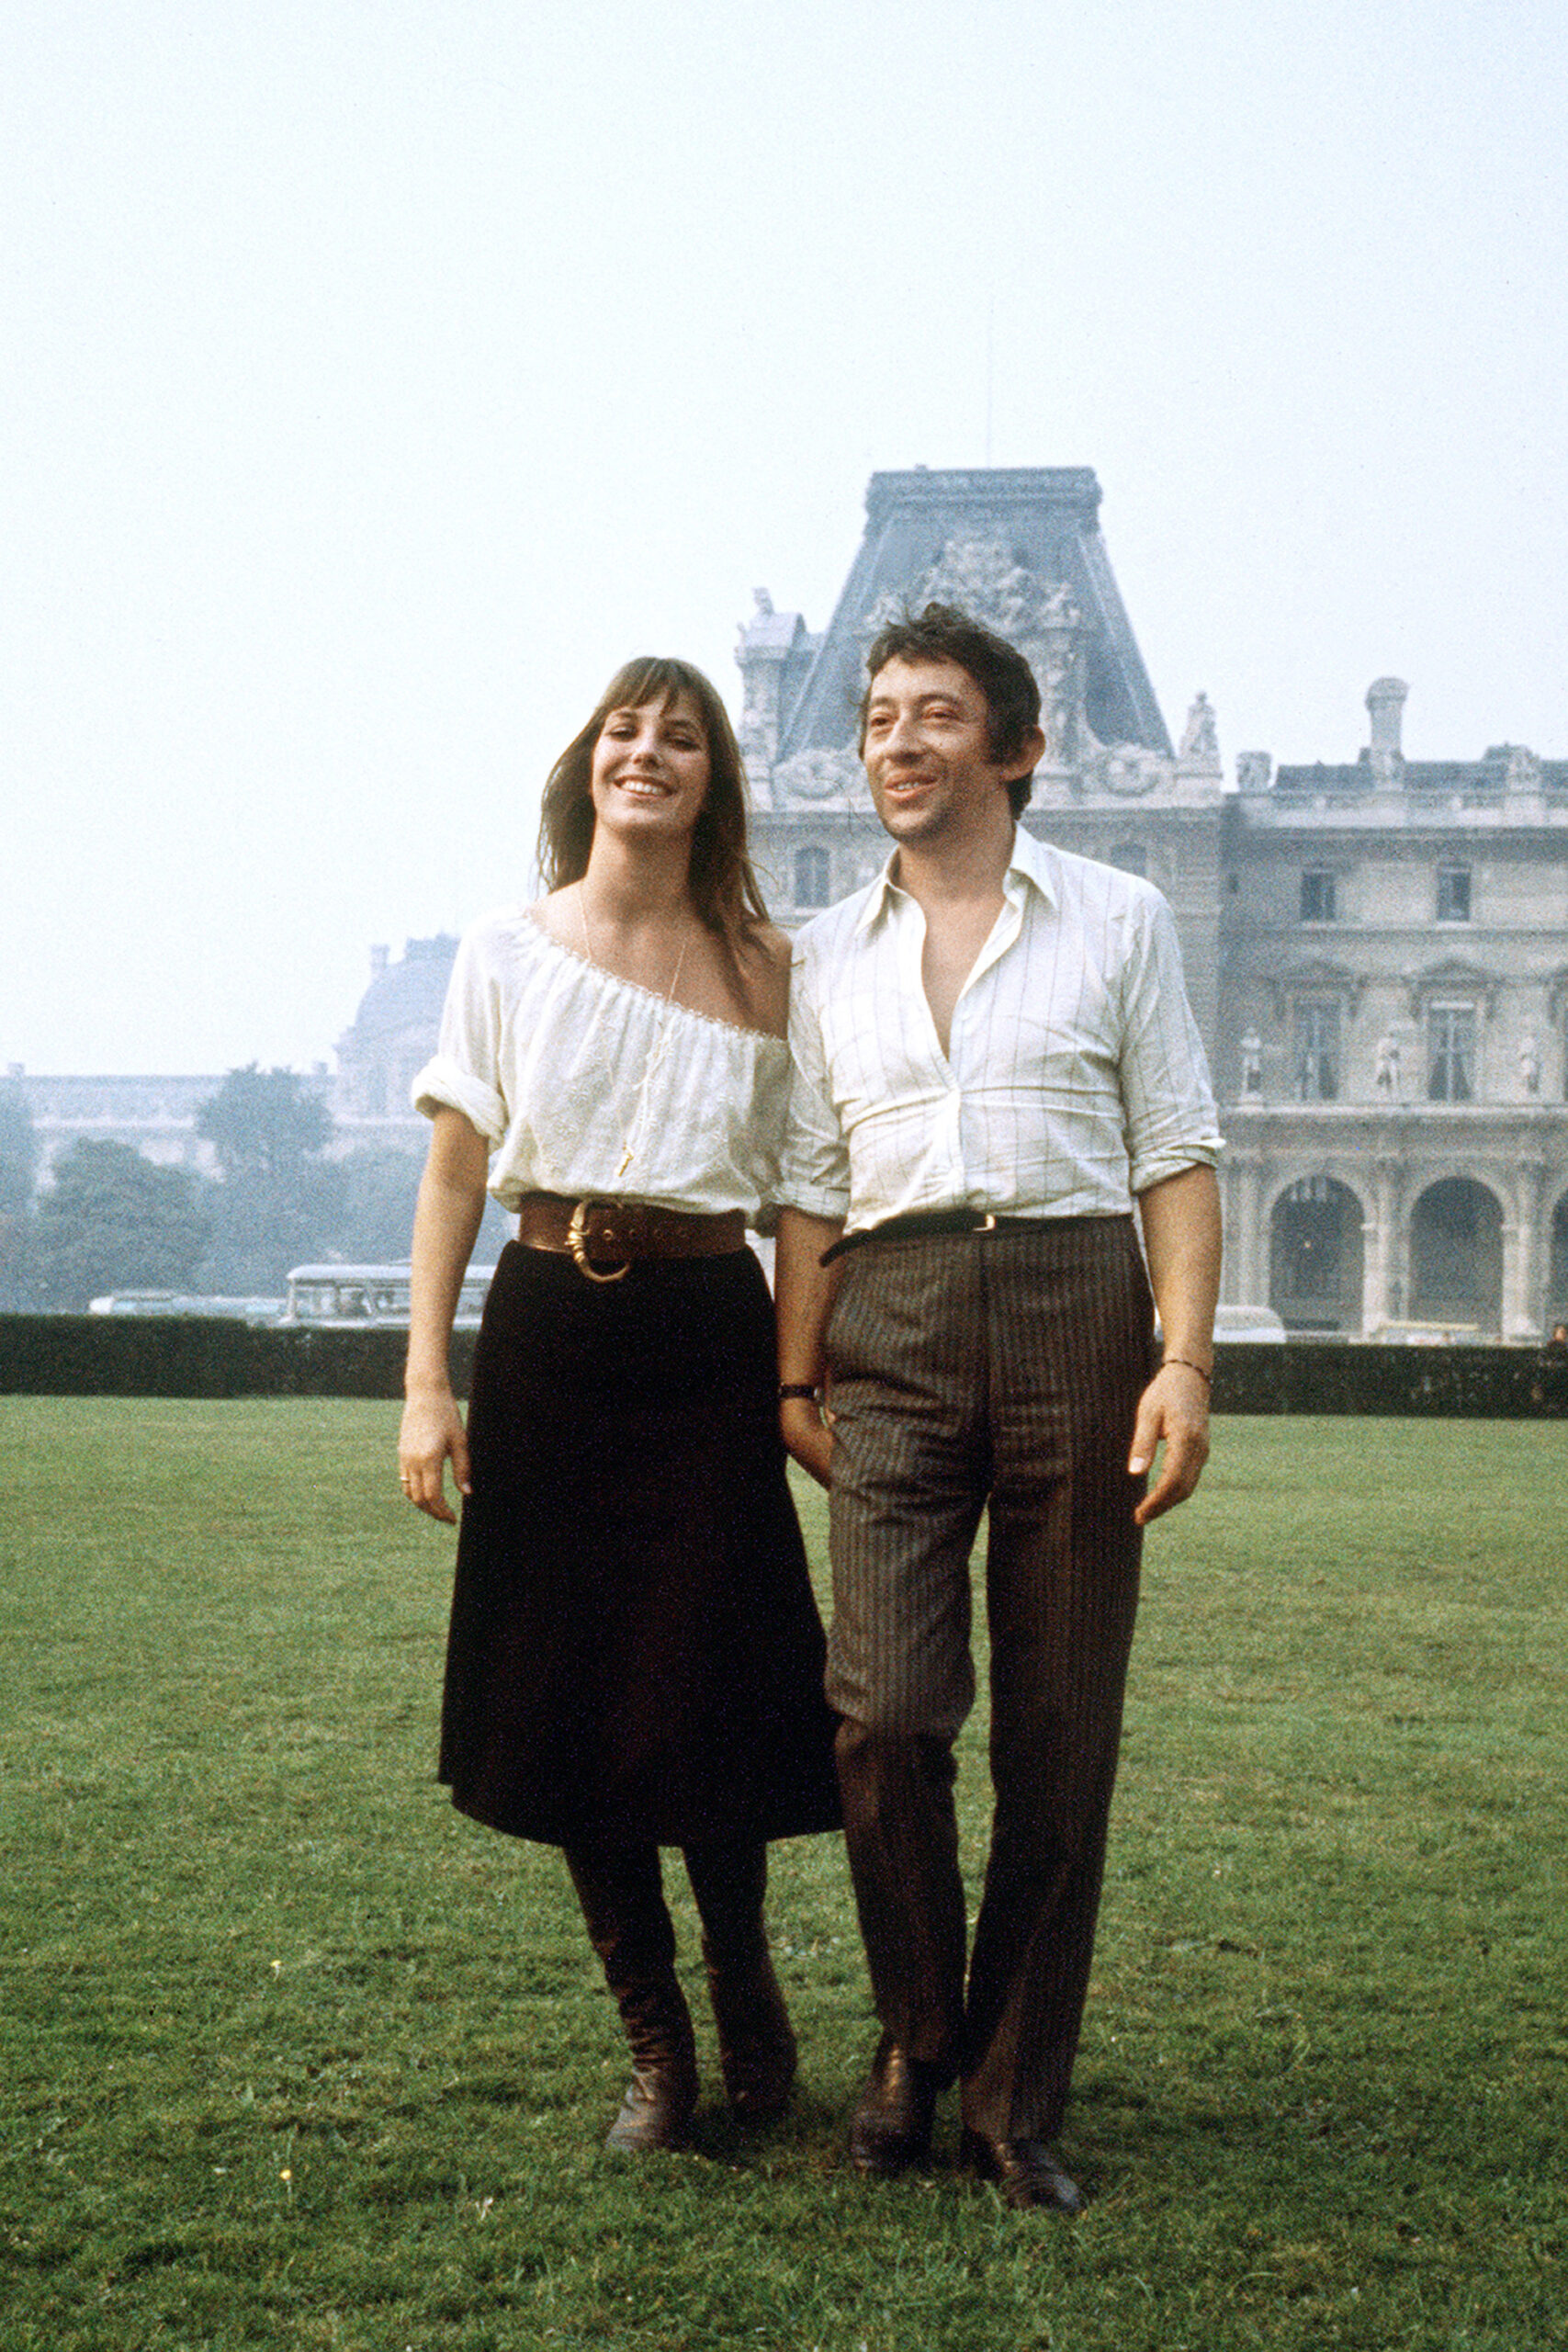 Jane Birkin dies: photos of her life and the unforgettable style that made  her an icon